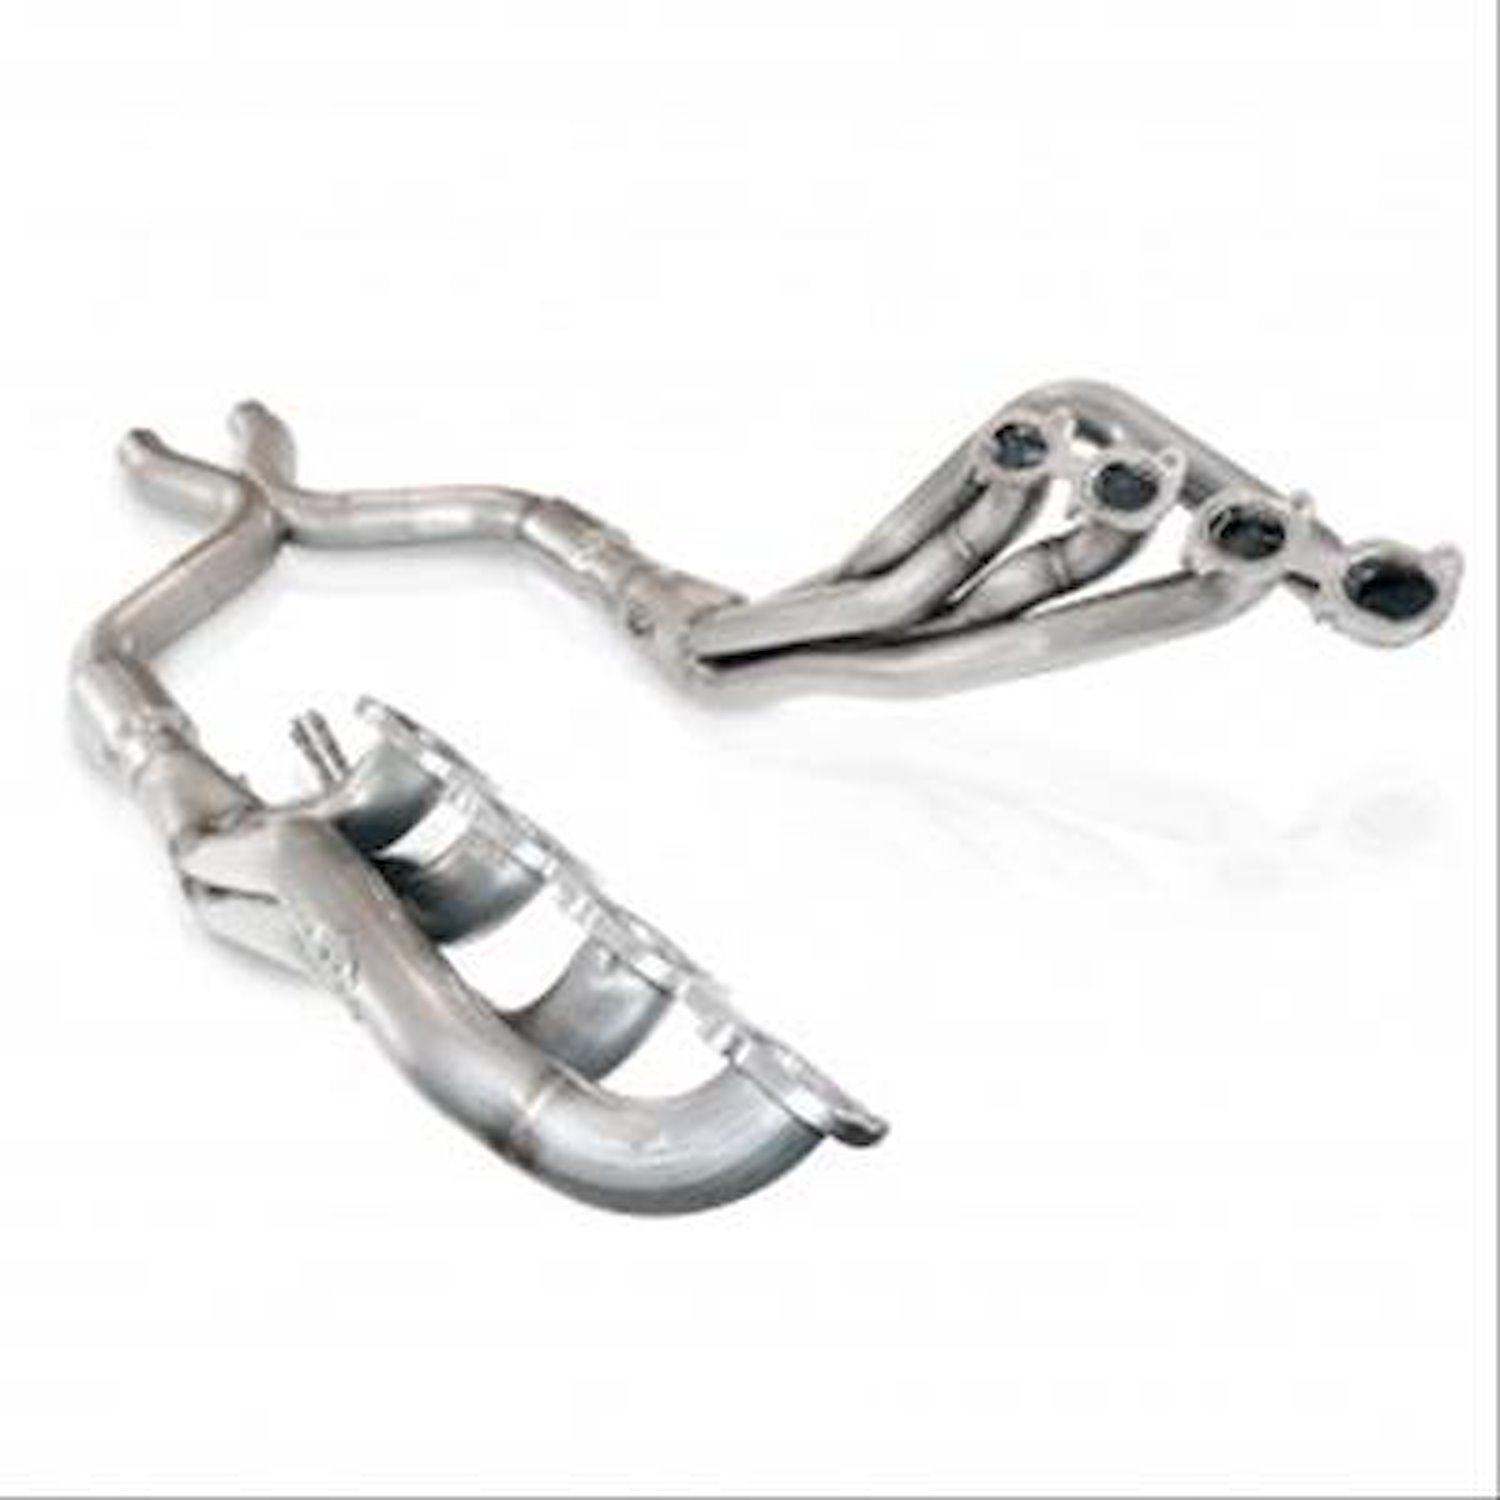 2007-2010 Shelby GT500 1 7/8 headers with lead pipes. Tig welded 304 s/s headers with 3/8 thick flan